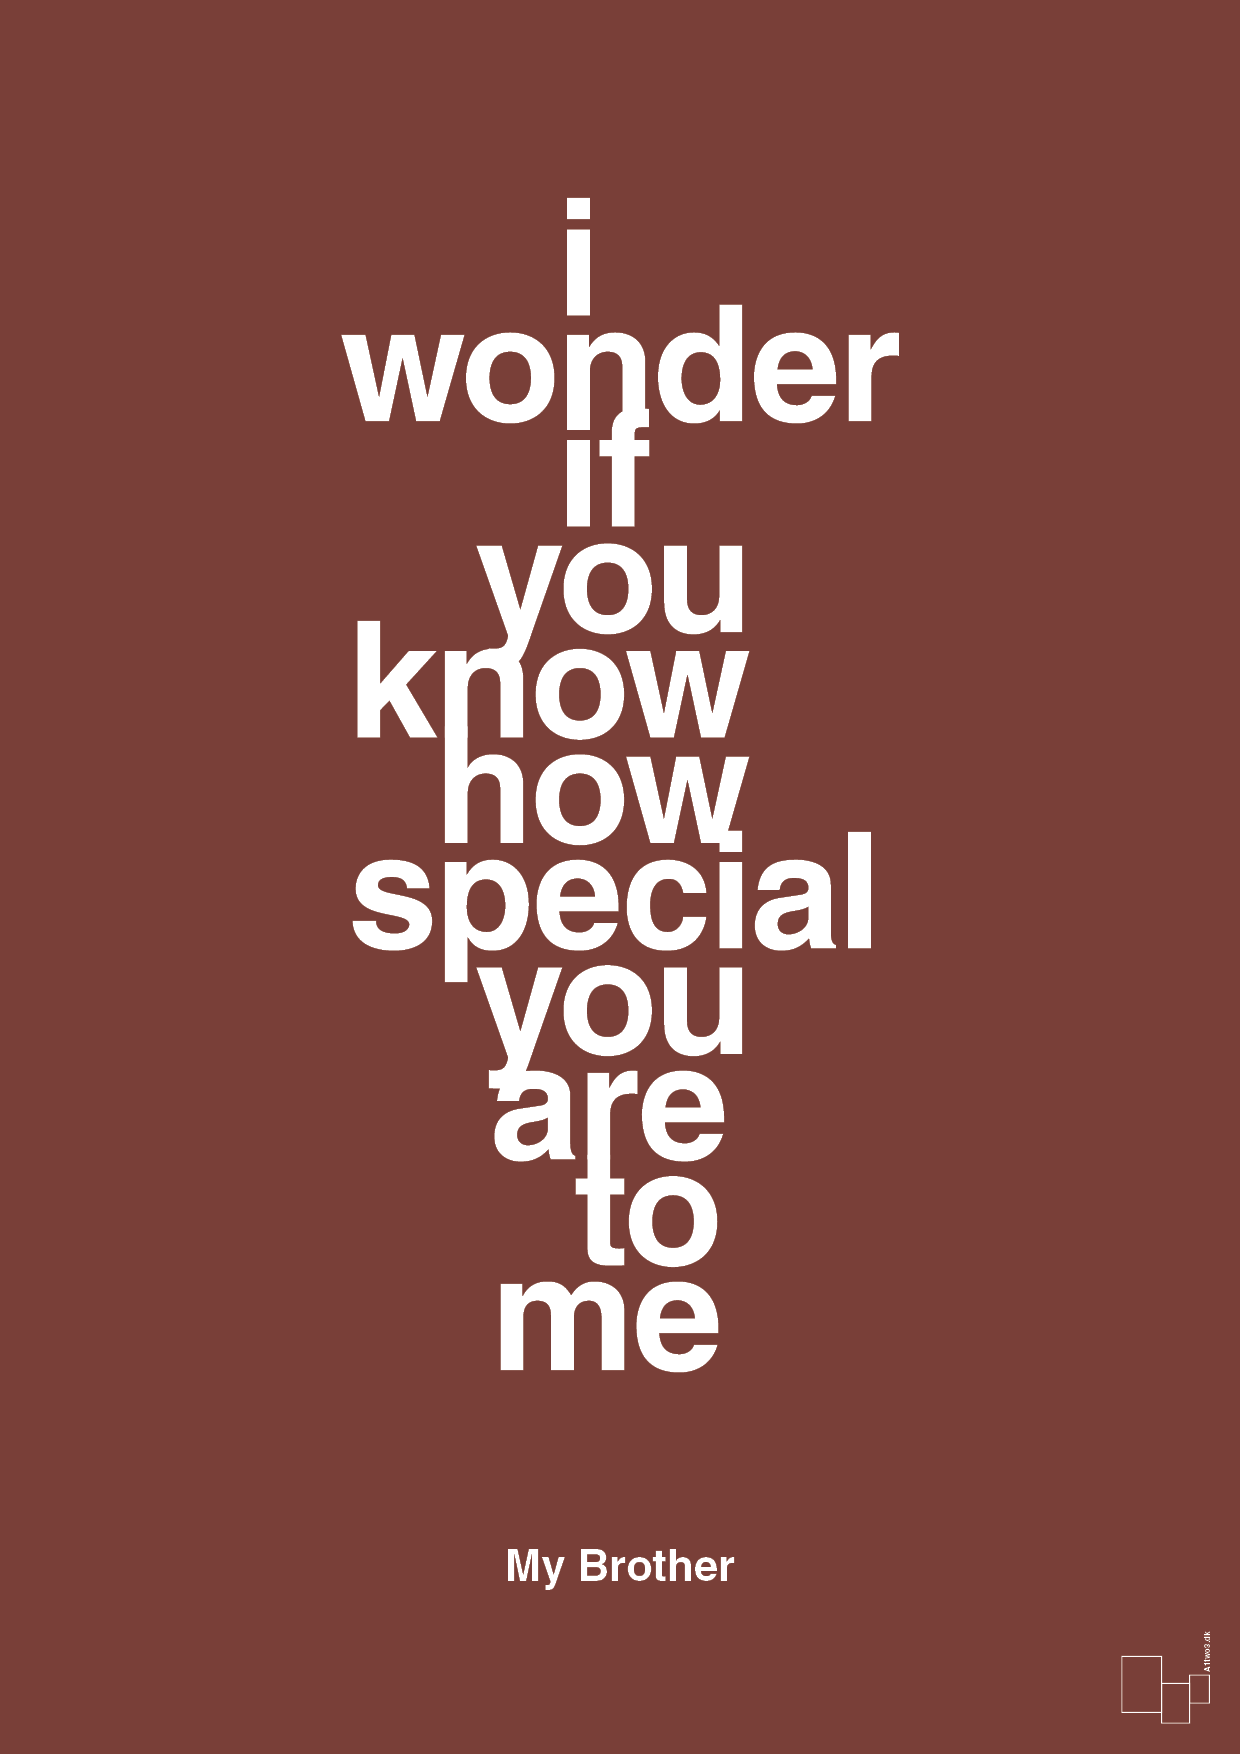 my brother - i wonder if you know how special you are to me - Plakat med Citater i Red Pepper